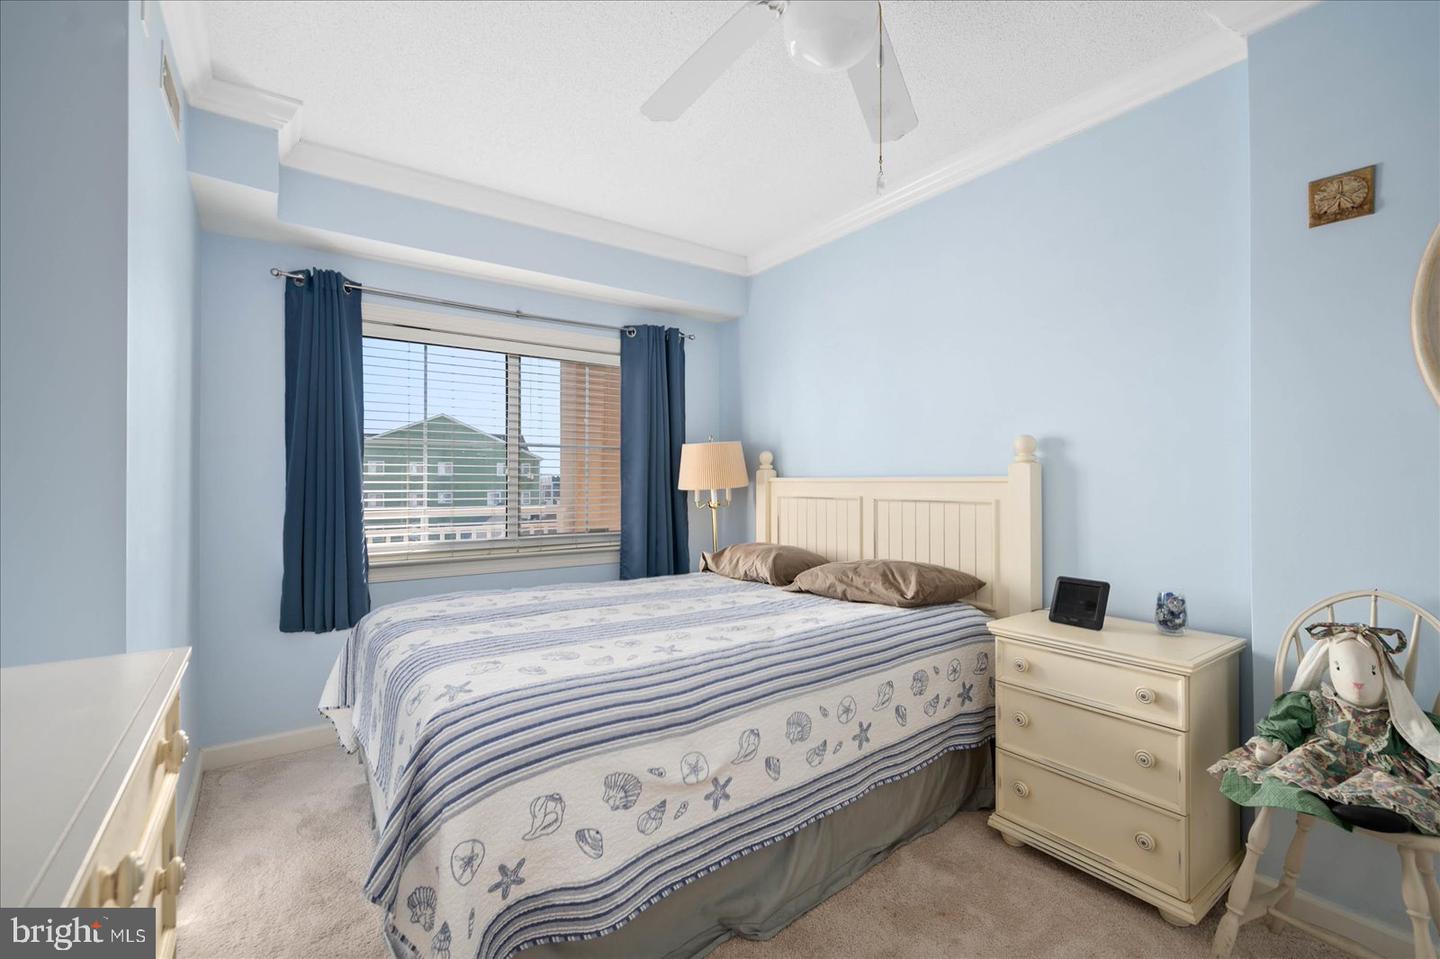 MDWO2019672-802922311928-2024-03-15-14-18-04 300 17th St #303 | Ocean City, MD Real Estate For Sale | MLS# Mdwo2019672  - 1st Choice Properties